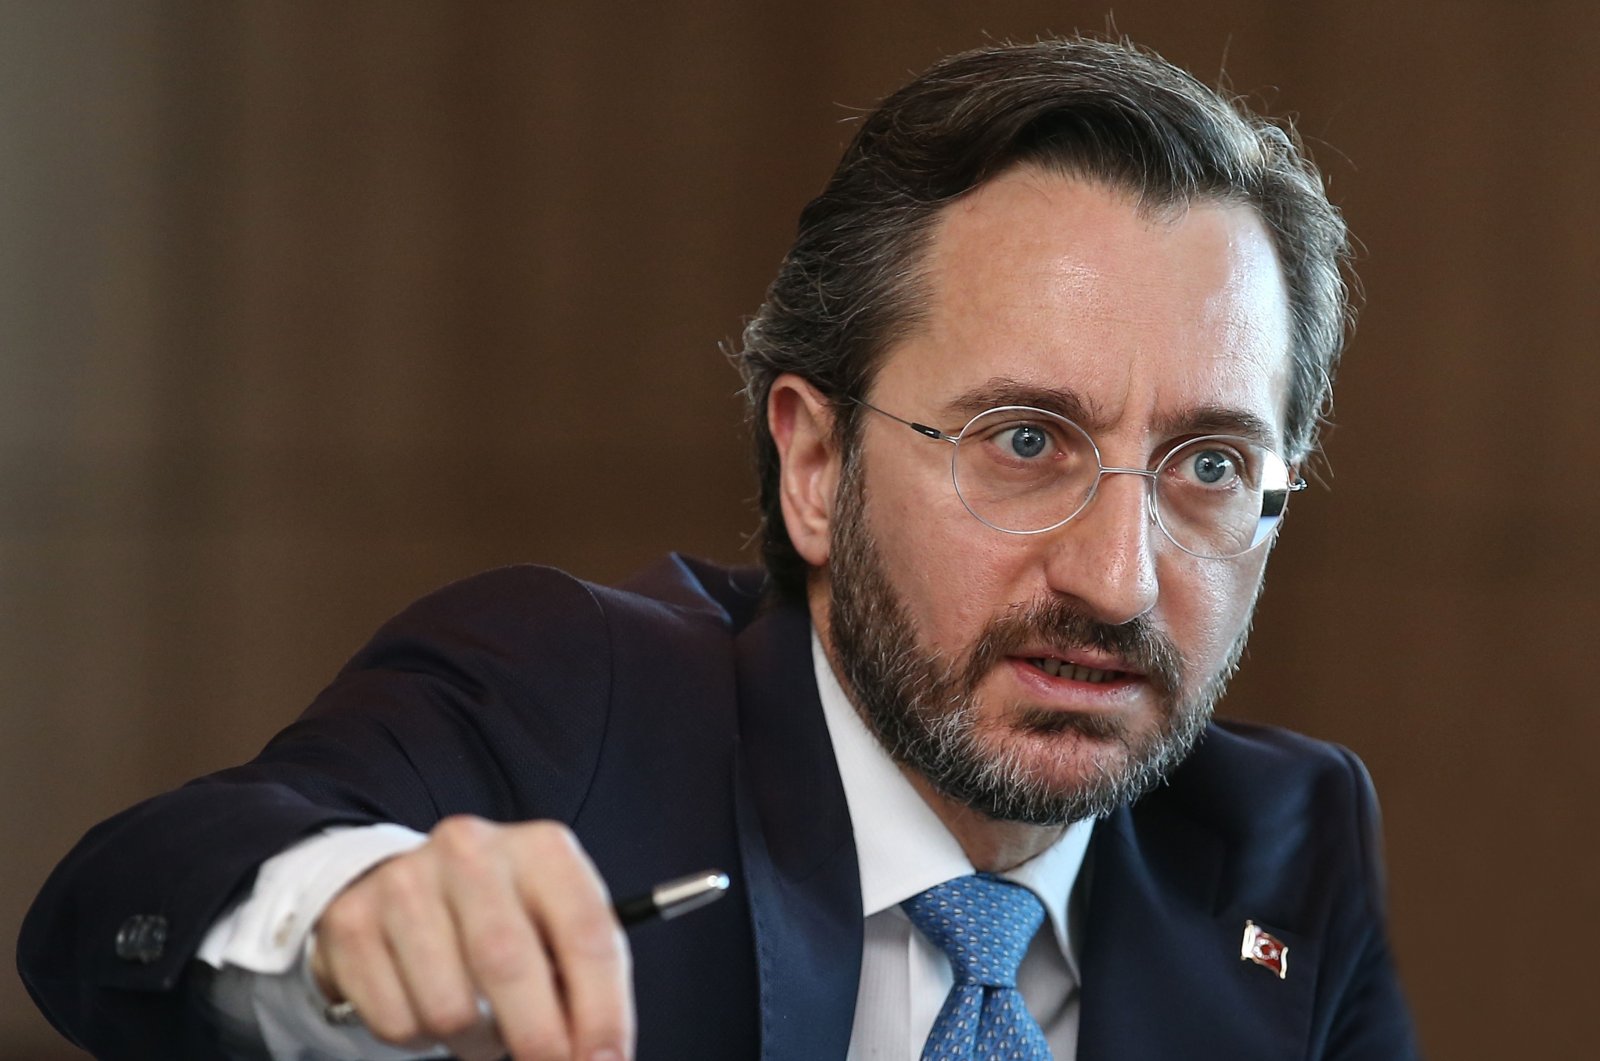 Communications Director Fahrettin Altun speaks during a press conference at the Communications Directorate in Ankara on Dec. 12, 2020 (AA Photo)